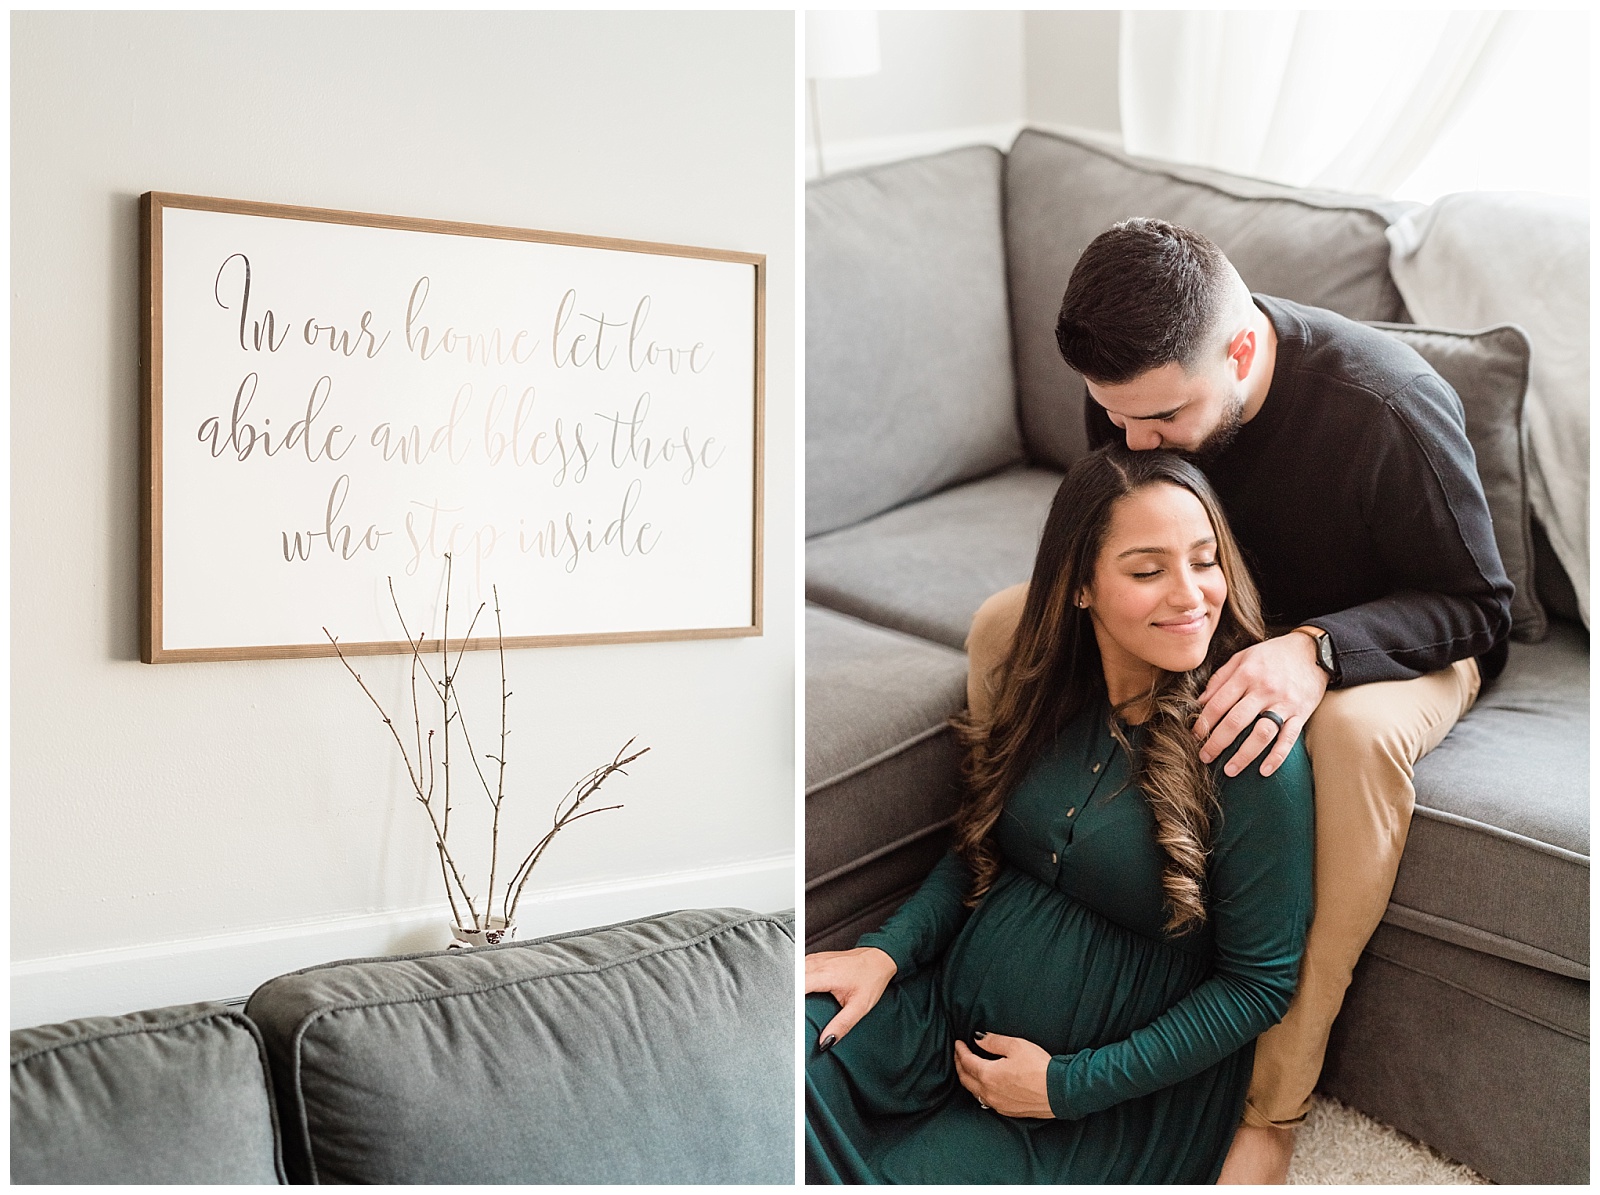 In Home Maternity Session, Nursery, Baby, New Parents, Maternity Shoot, Pregnant, Pregnancy Photos, New Jersey, Photographer, Baby Boy, Home, Couch, Living Room,, Photo